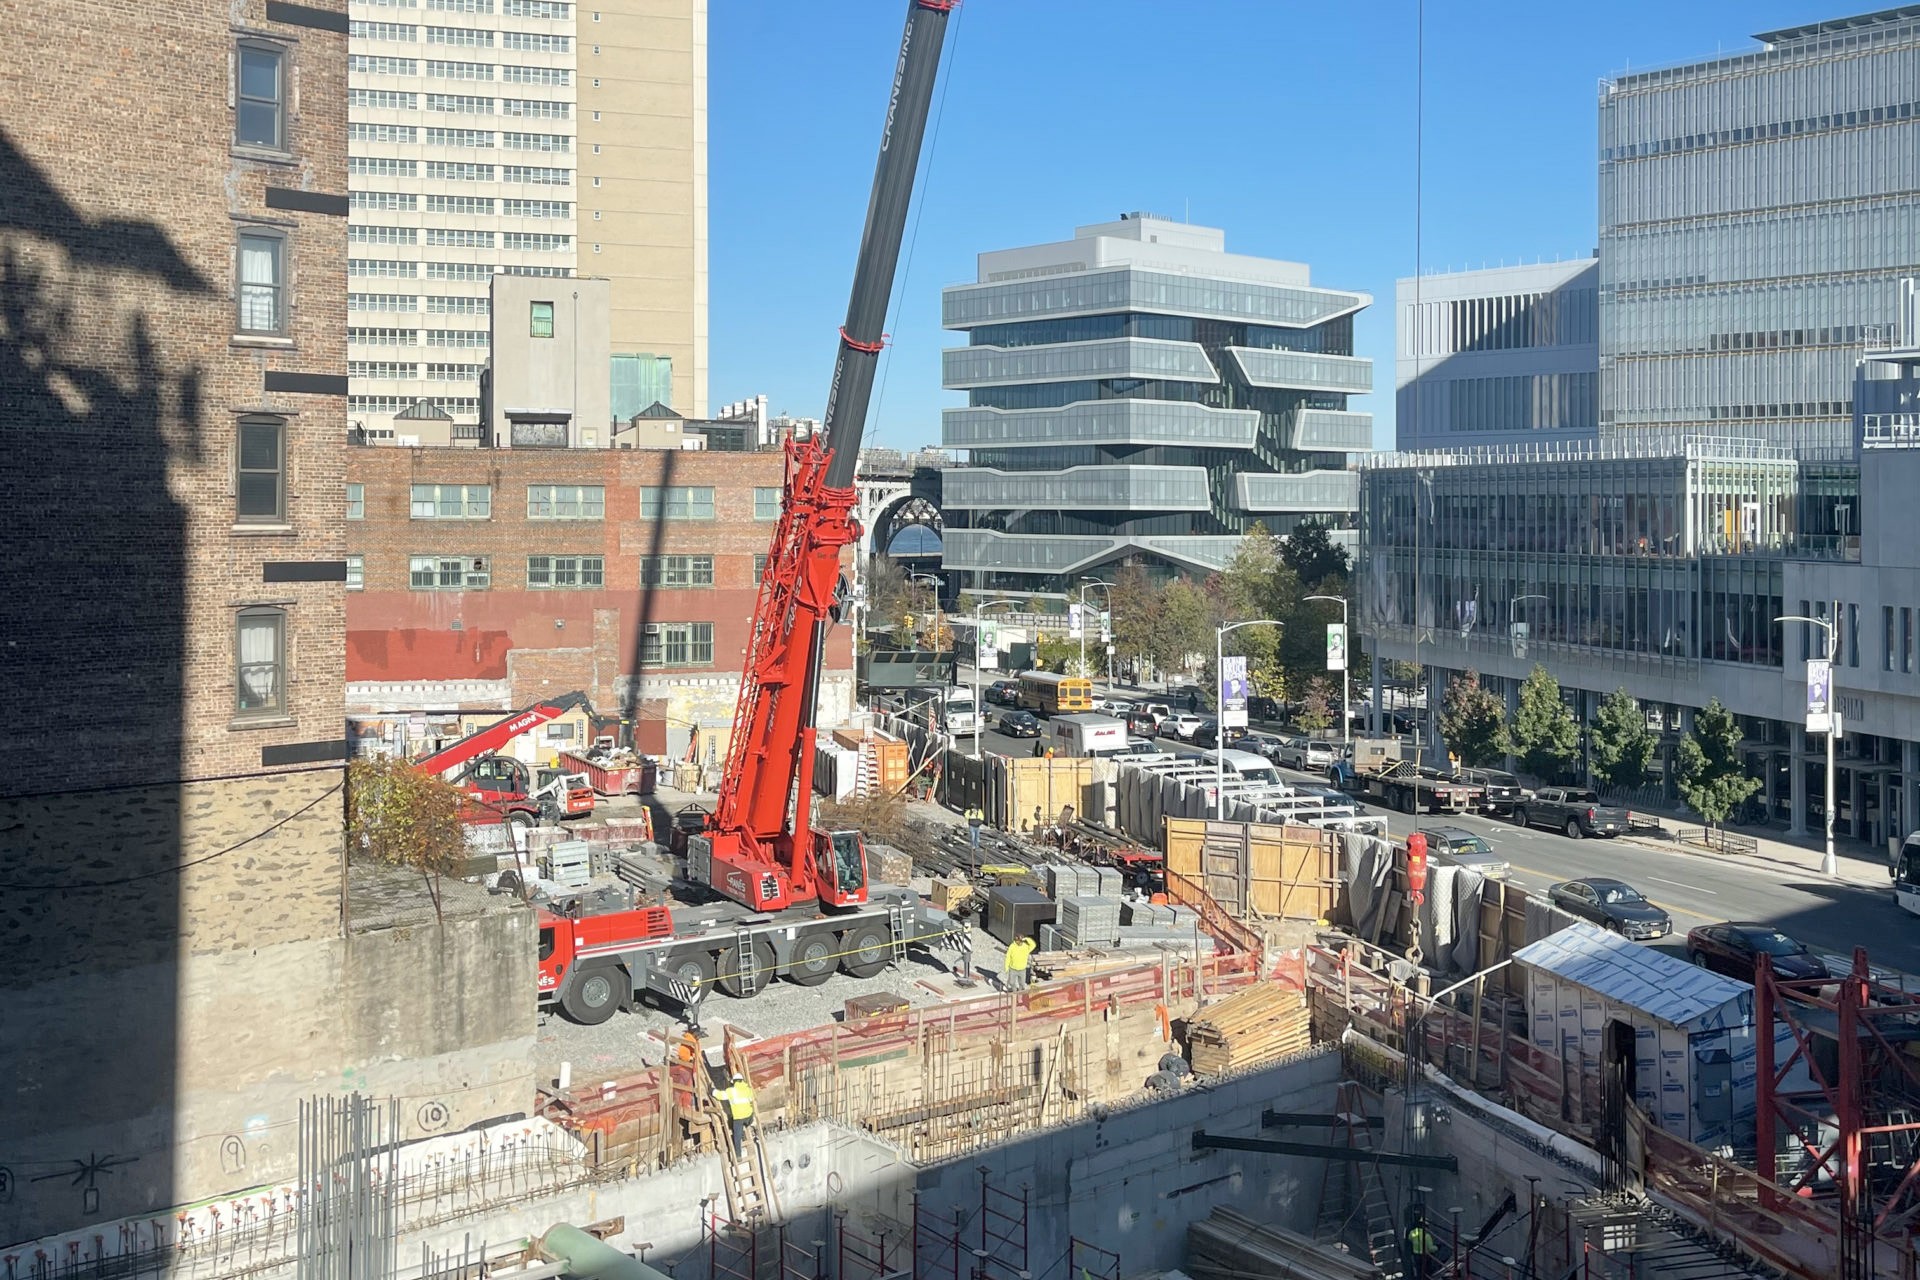 A view of the construction site of 600 W. 125th Street with a large crane parked in the middle.